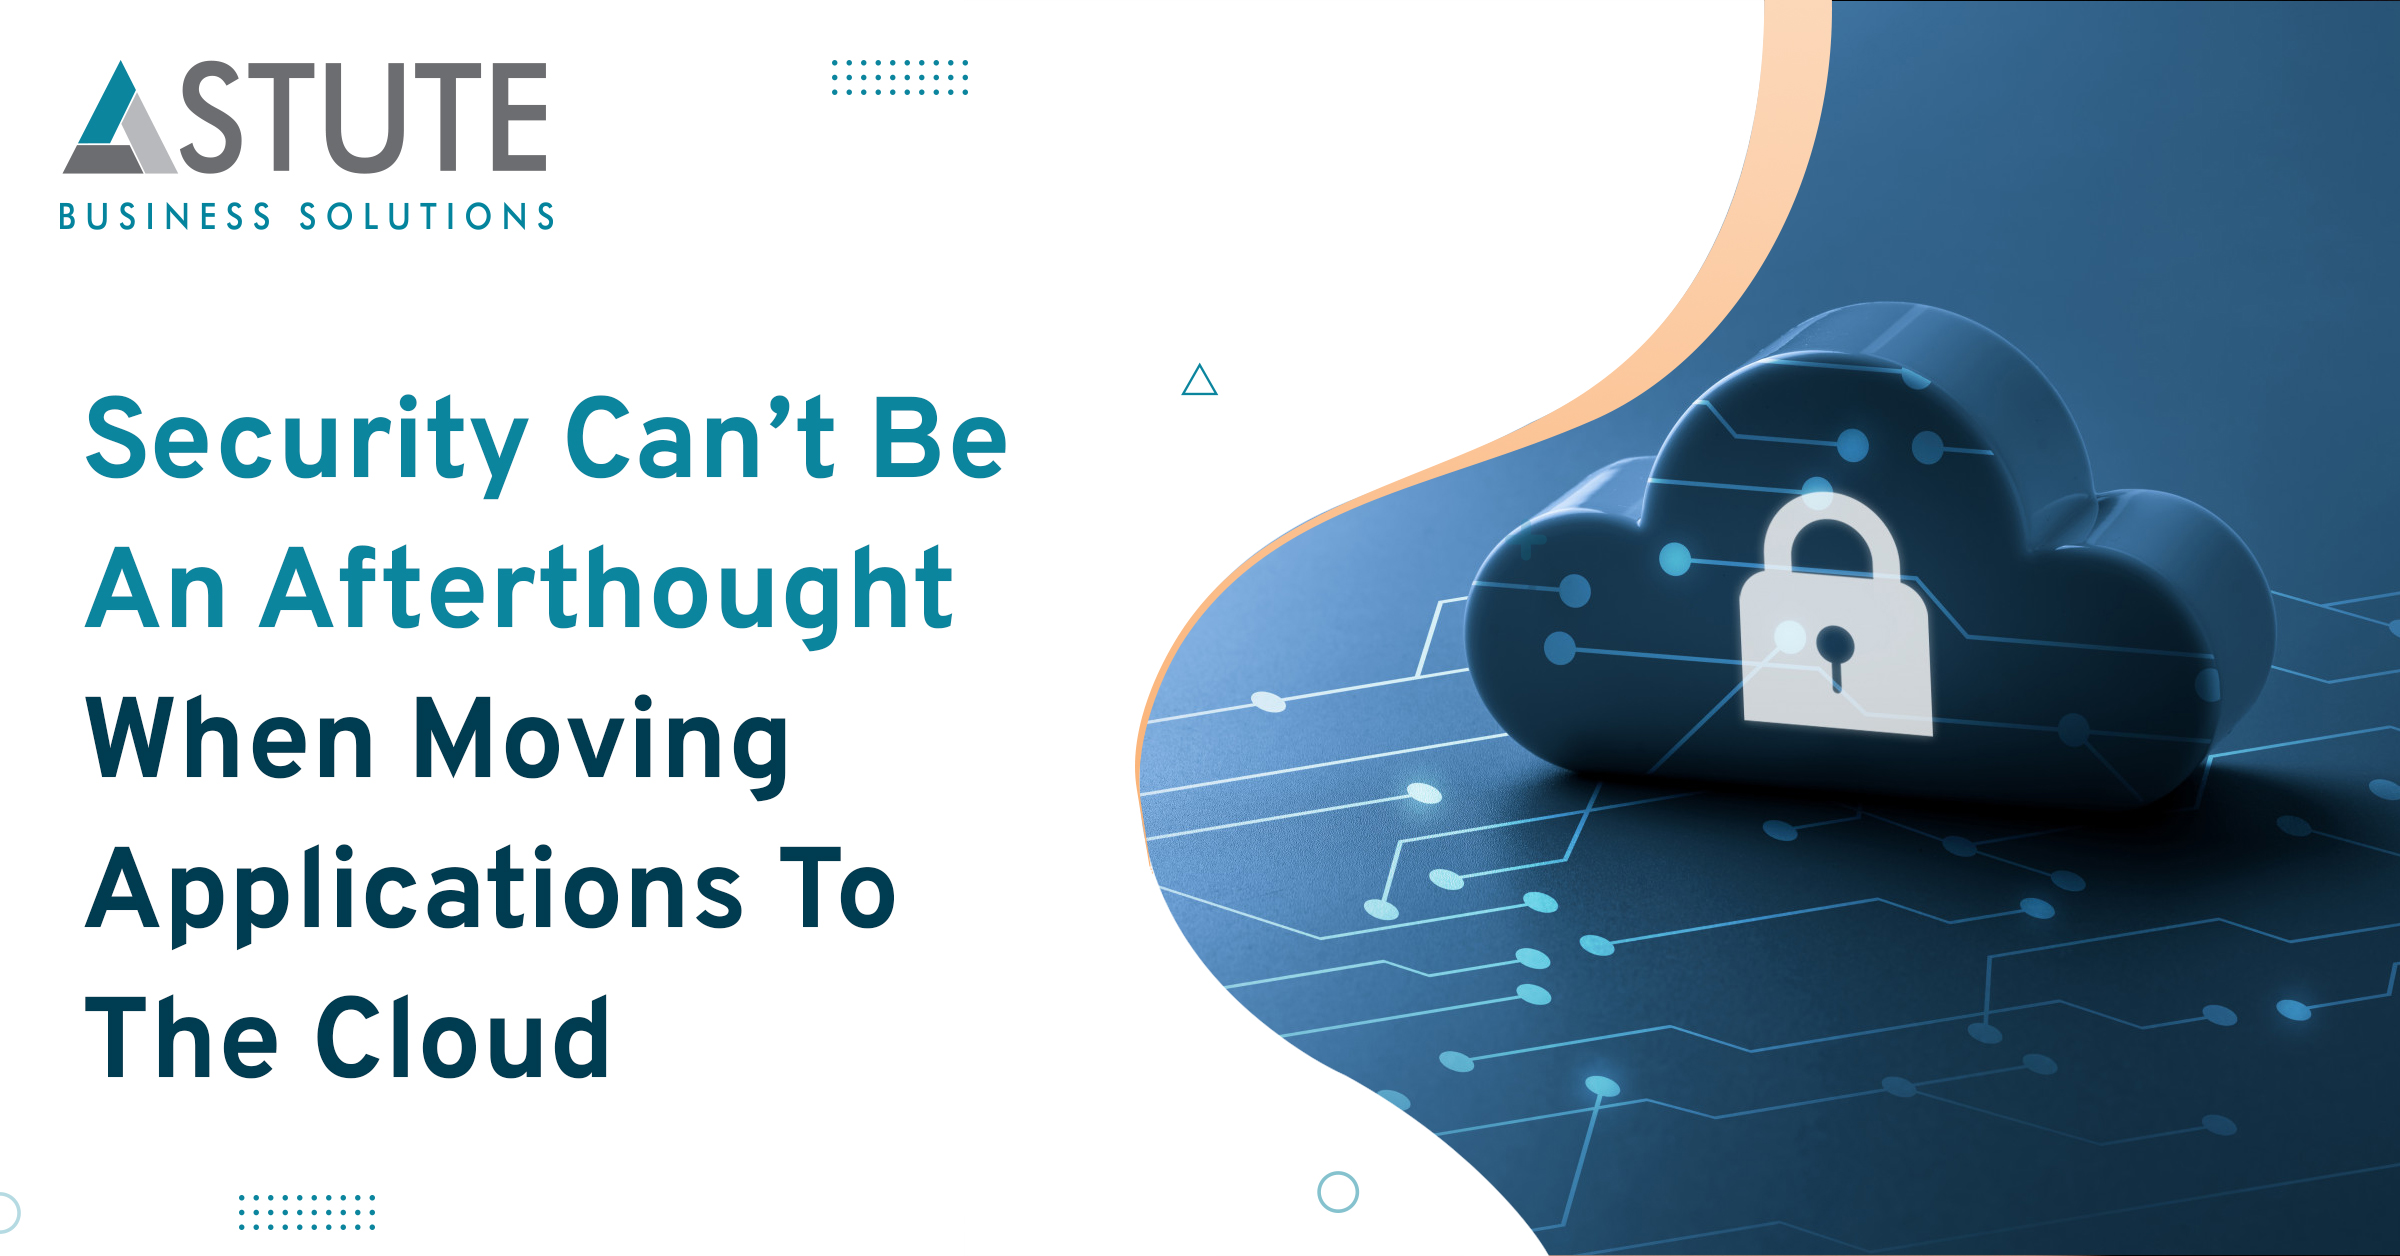 Security Can’t Be An Afterthought When Moving Applications To The Cloud